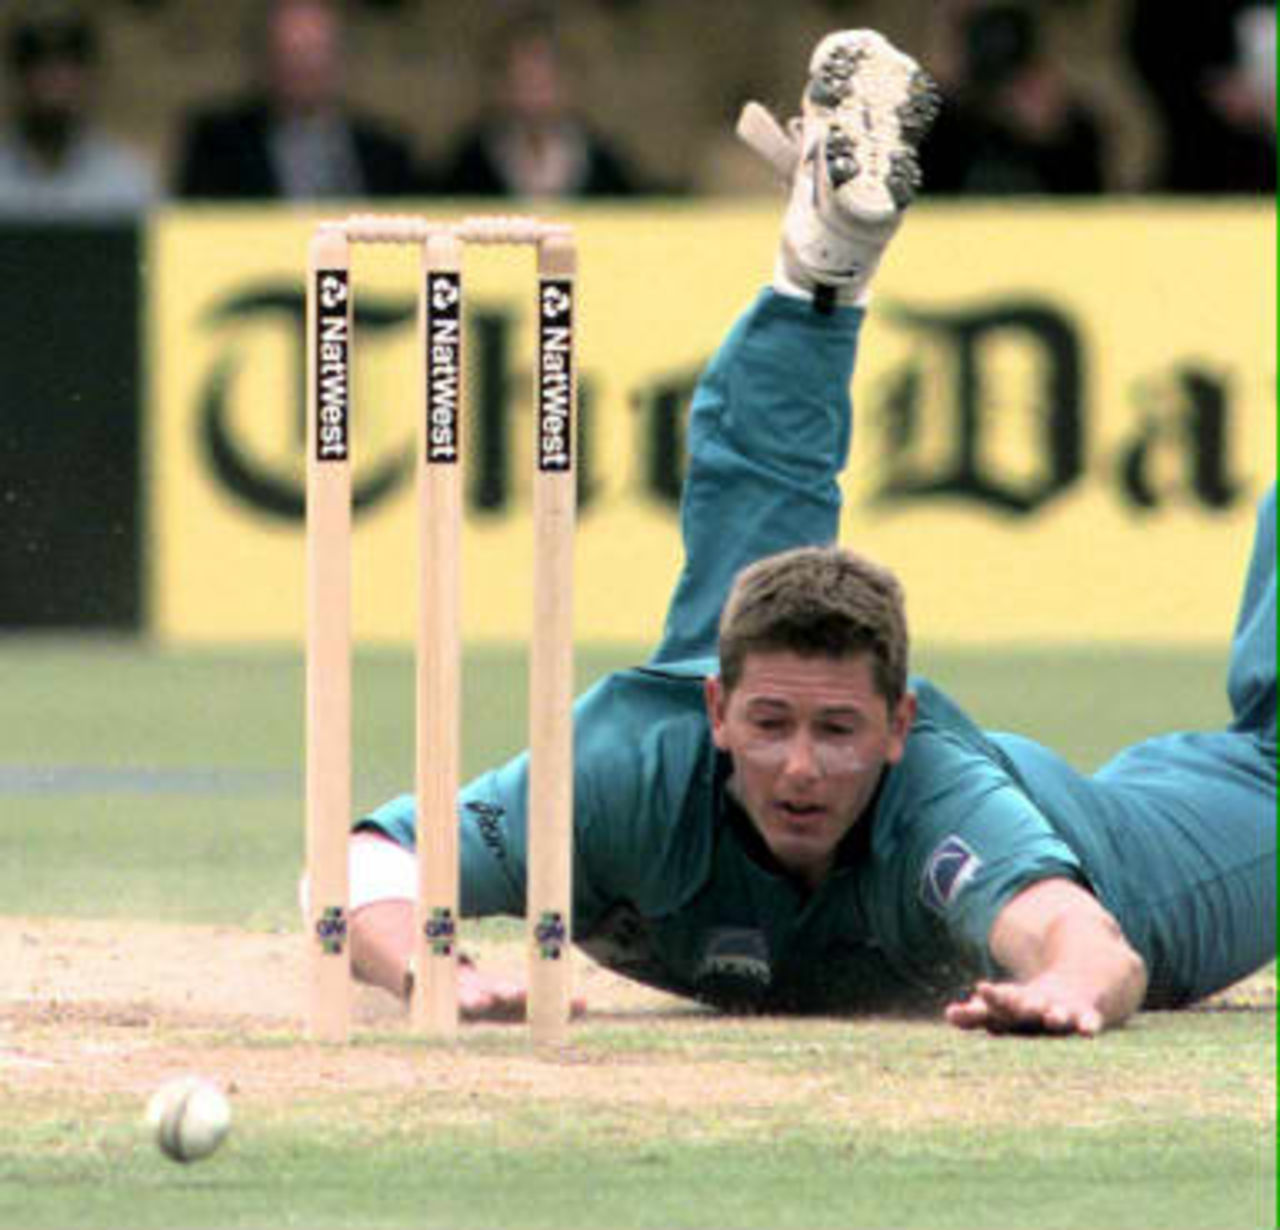 New Zealand's Geoff Allott fails in an attempt to run out South Africa's Herschelle Gibbs 10 June 1999 during their Cricket World Cup Super Six match against South Africa at Edgbaston